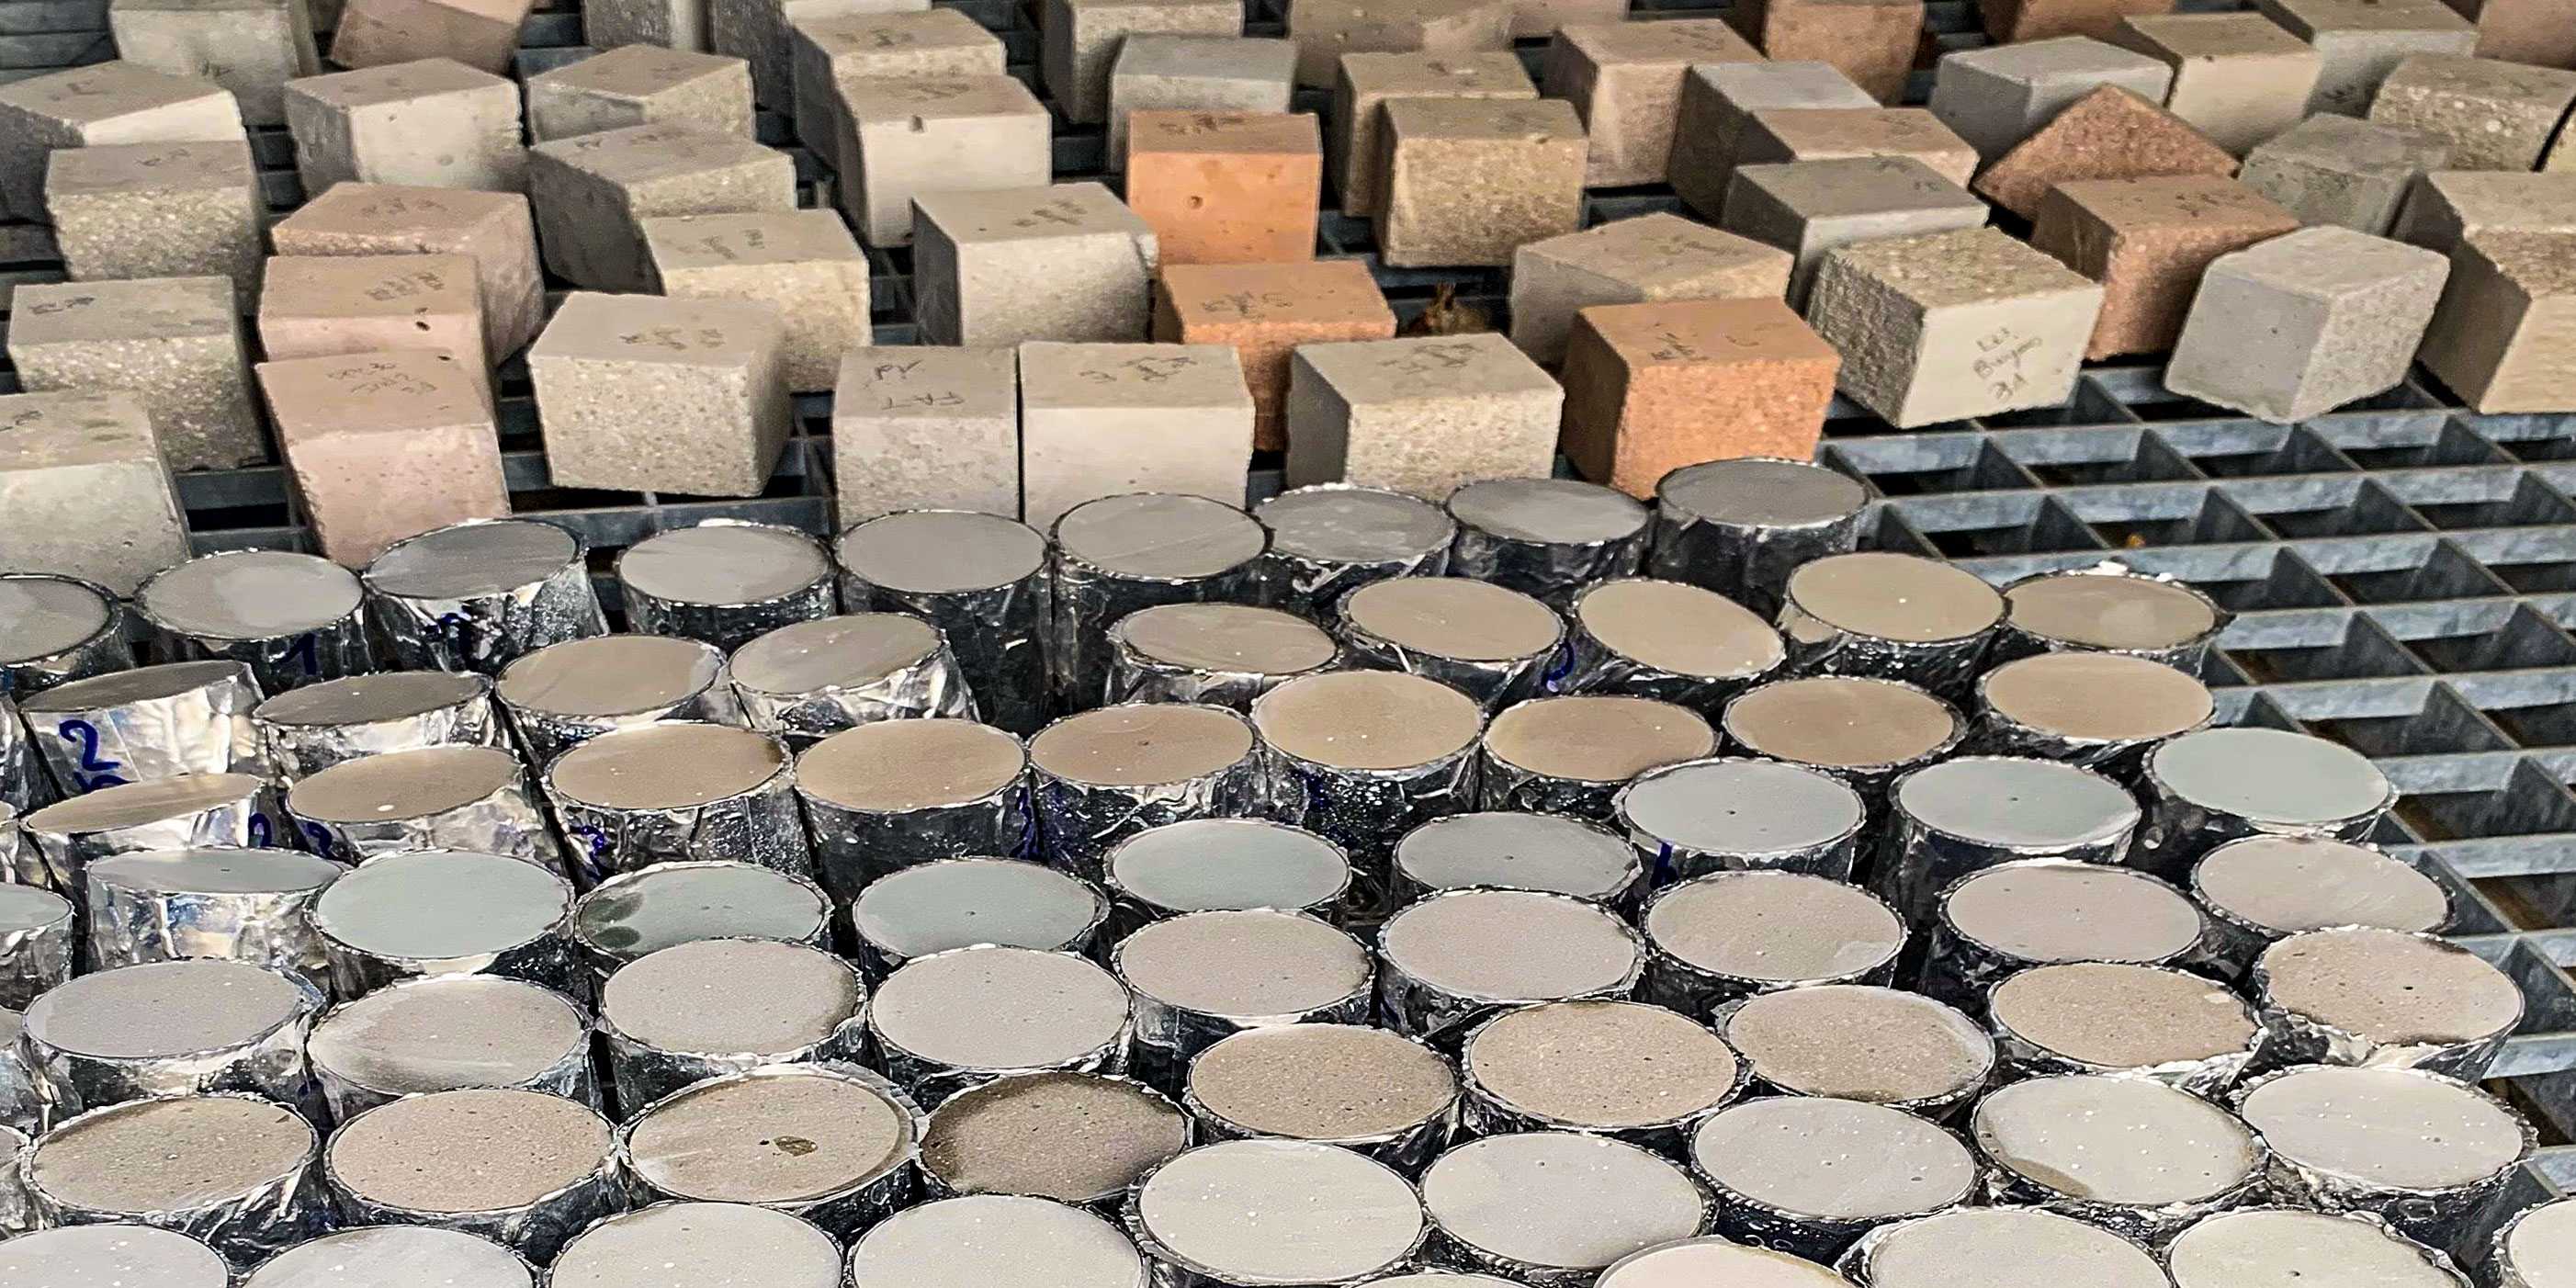 Concrete cubes and cylinders stacked next to each other